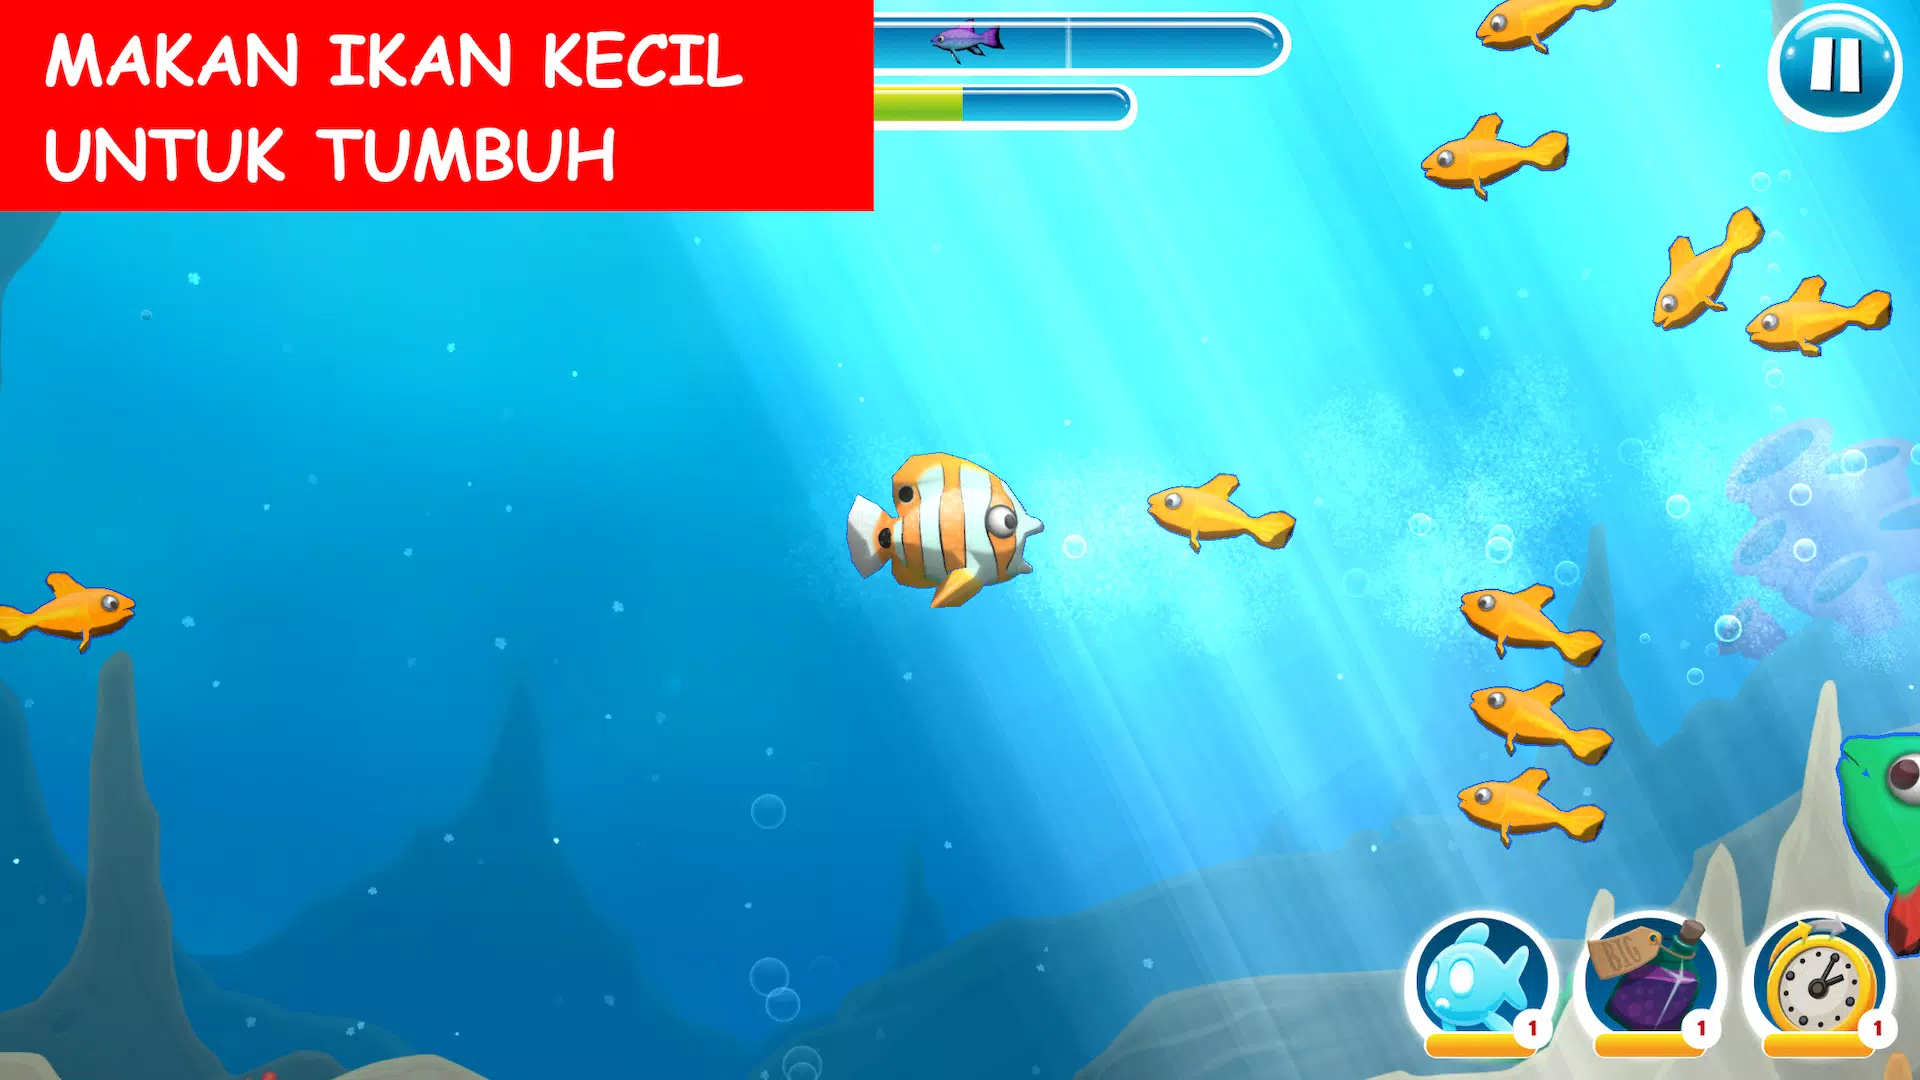 Download Game Feed And Grow Fish Android Offline Terbaru 2023 Mod Apk Di  Android Grafik HD 